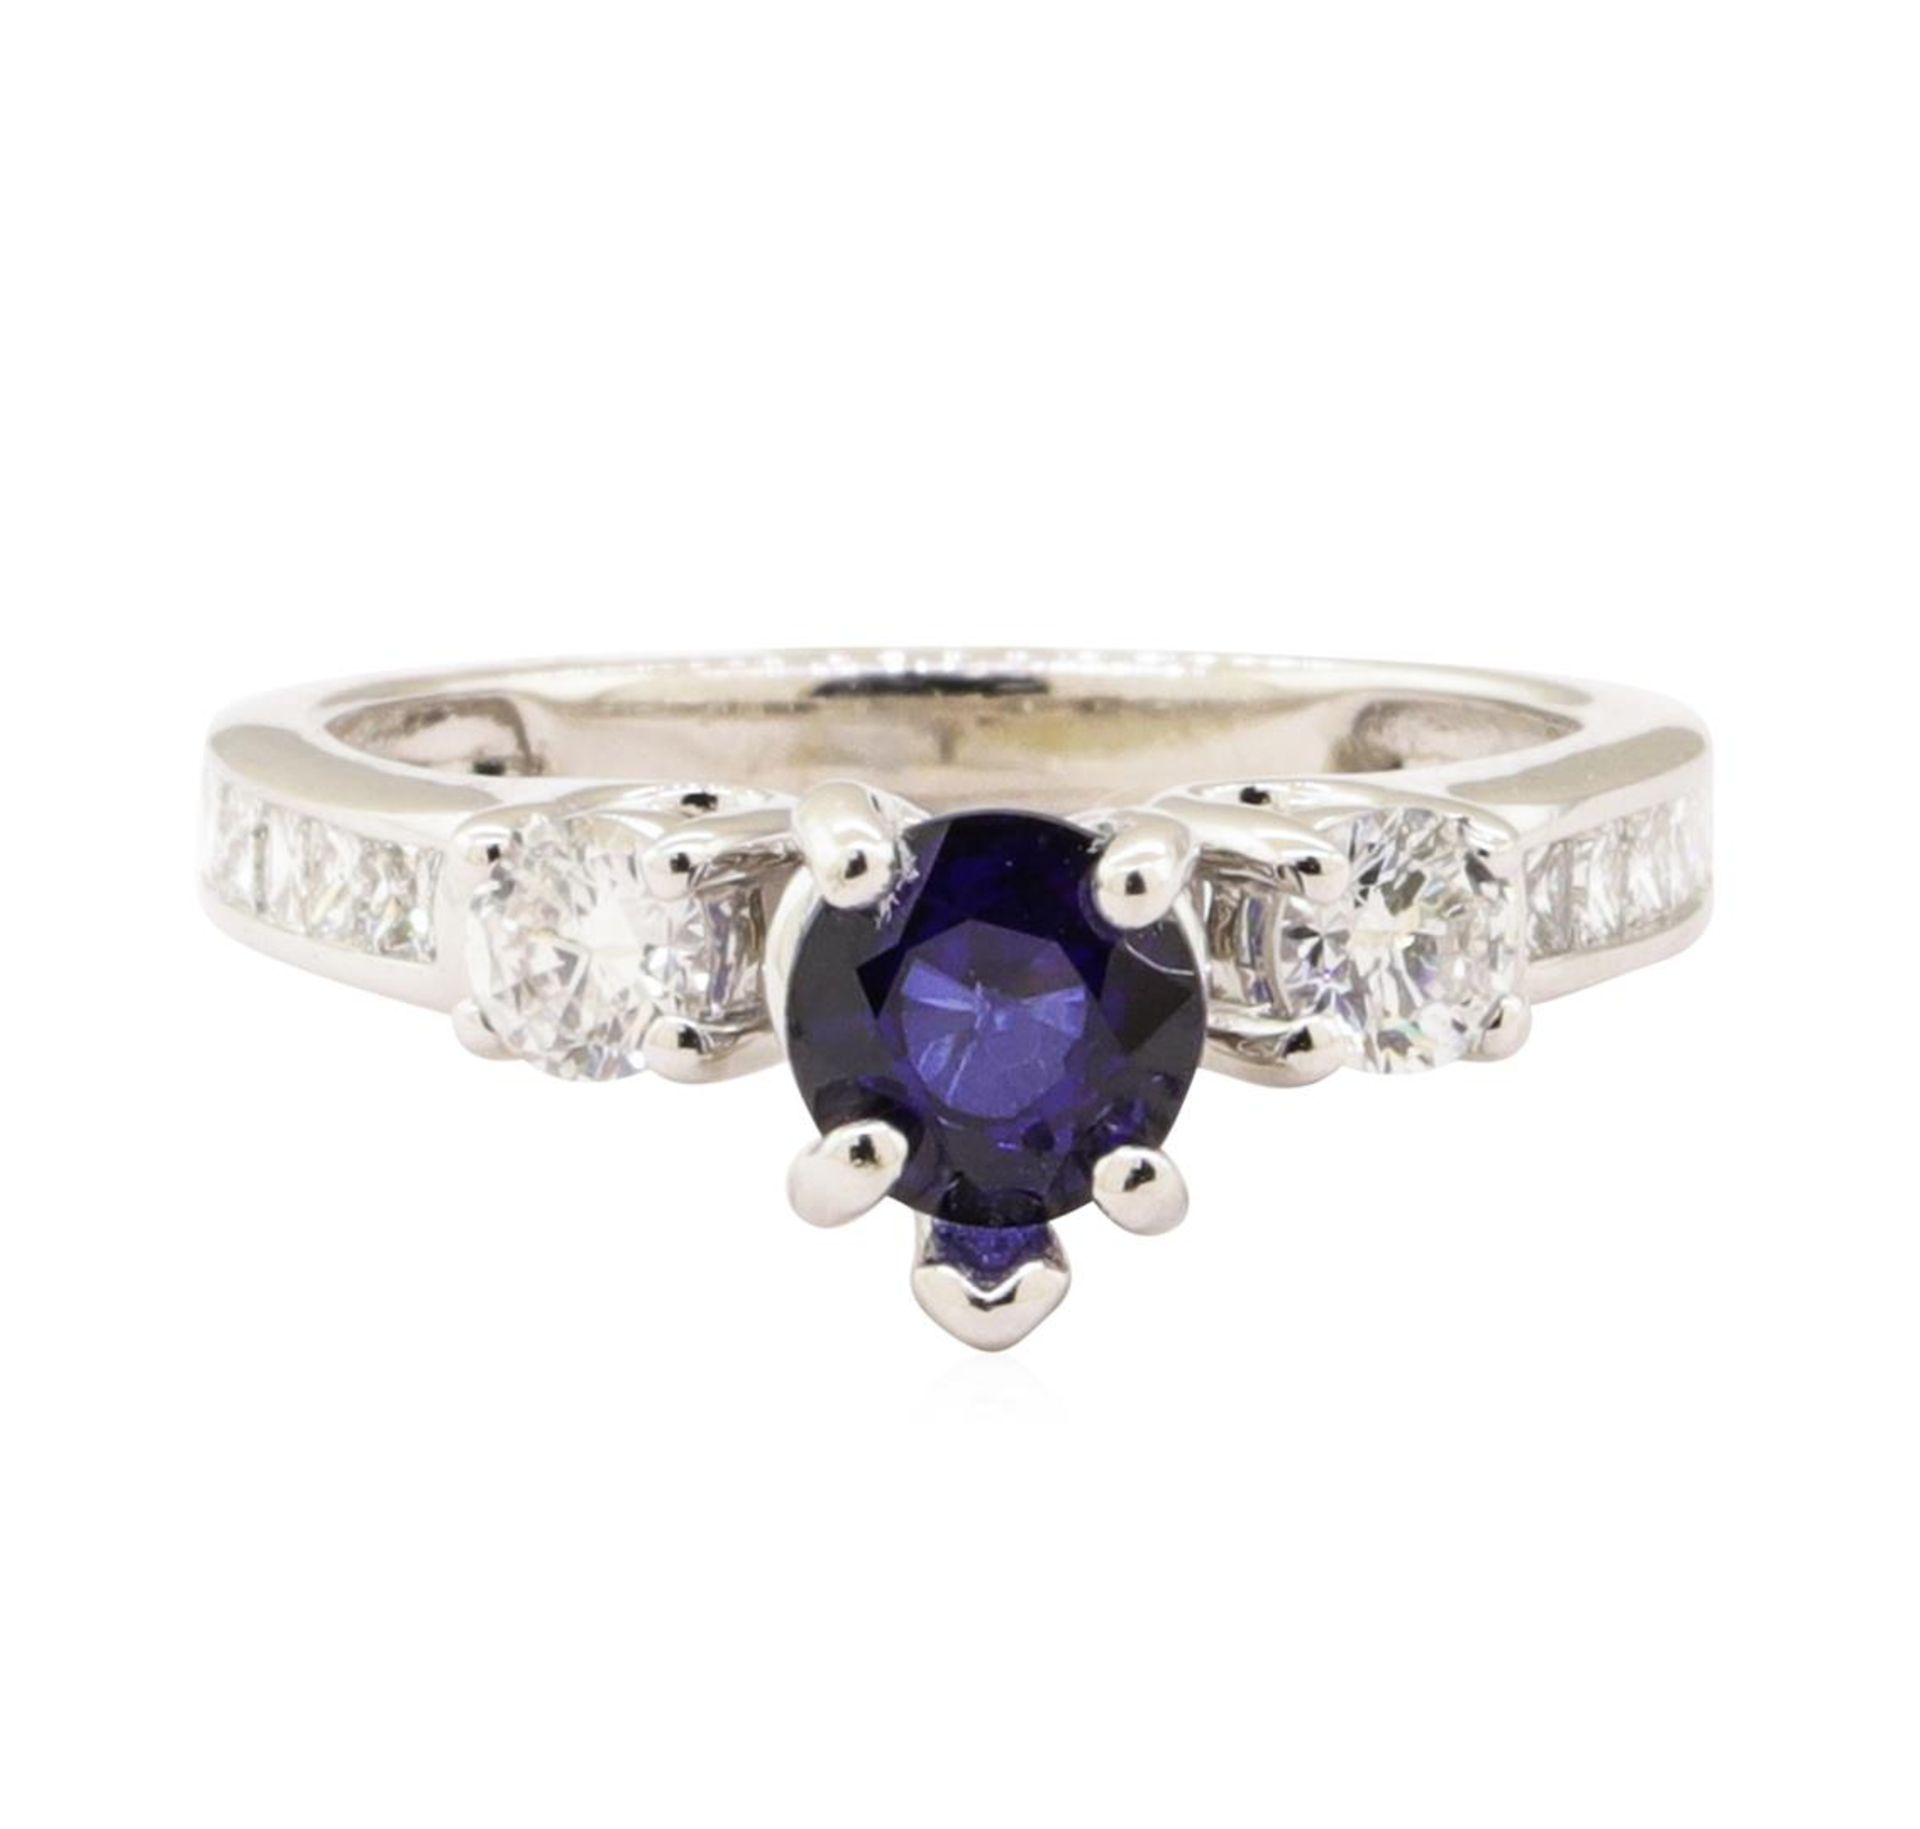 1.23 ctw Blue Sapphire and Diamond Ring - 14KT White Gold - Image 2 of 4